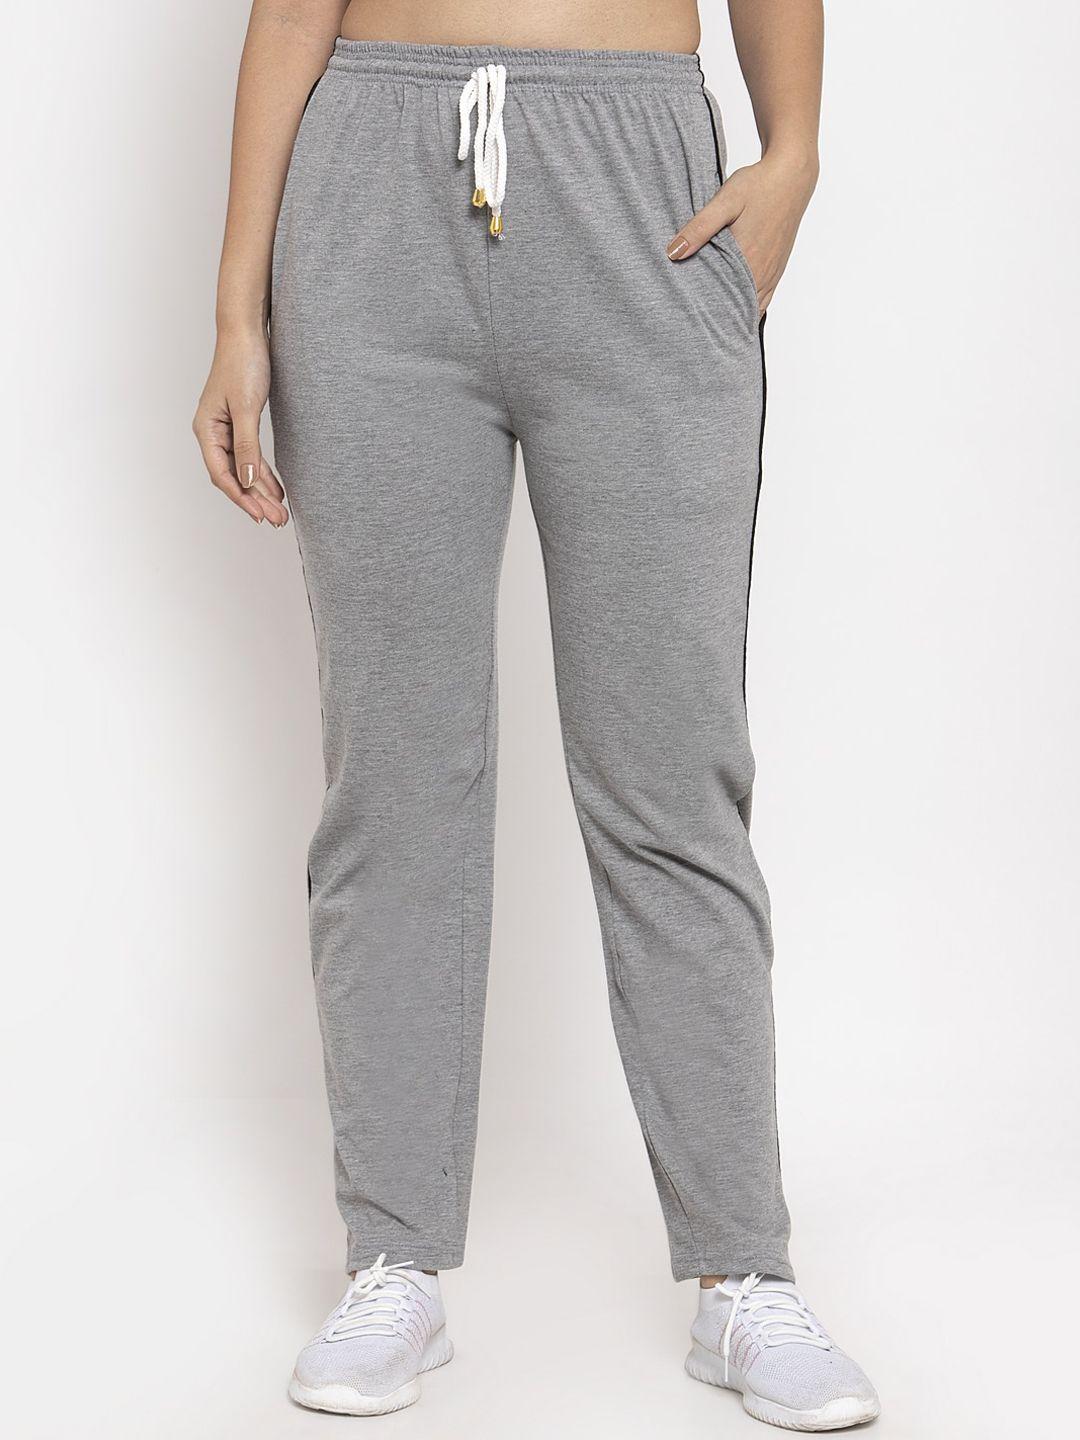 clora creation women grey solid cotton track pant